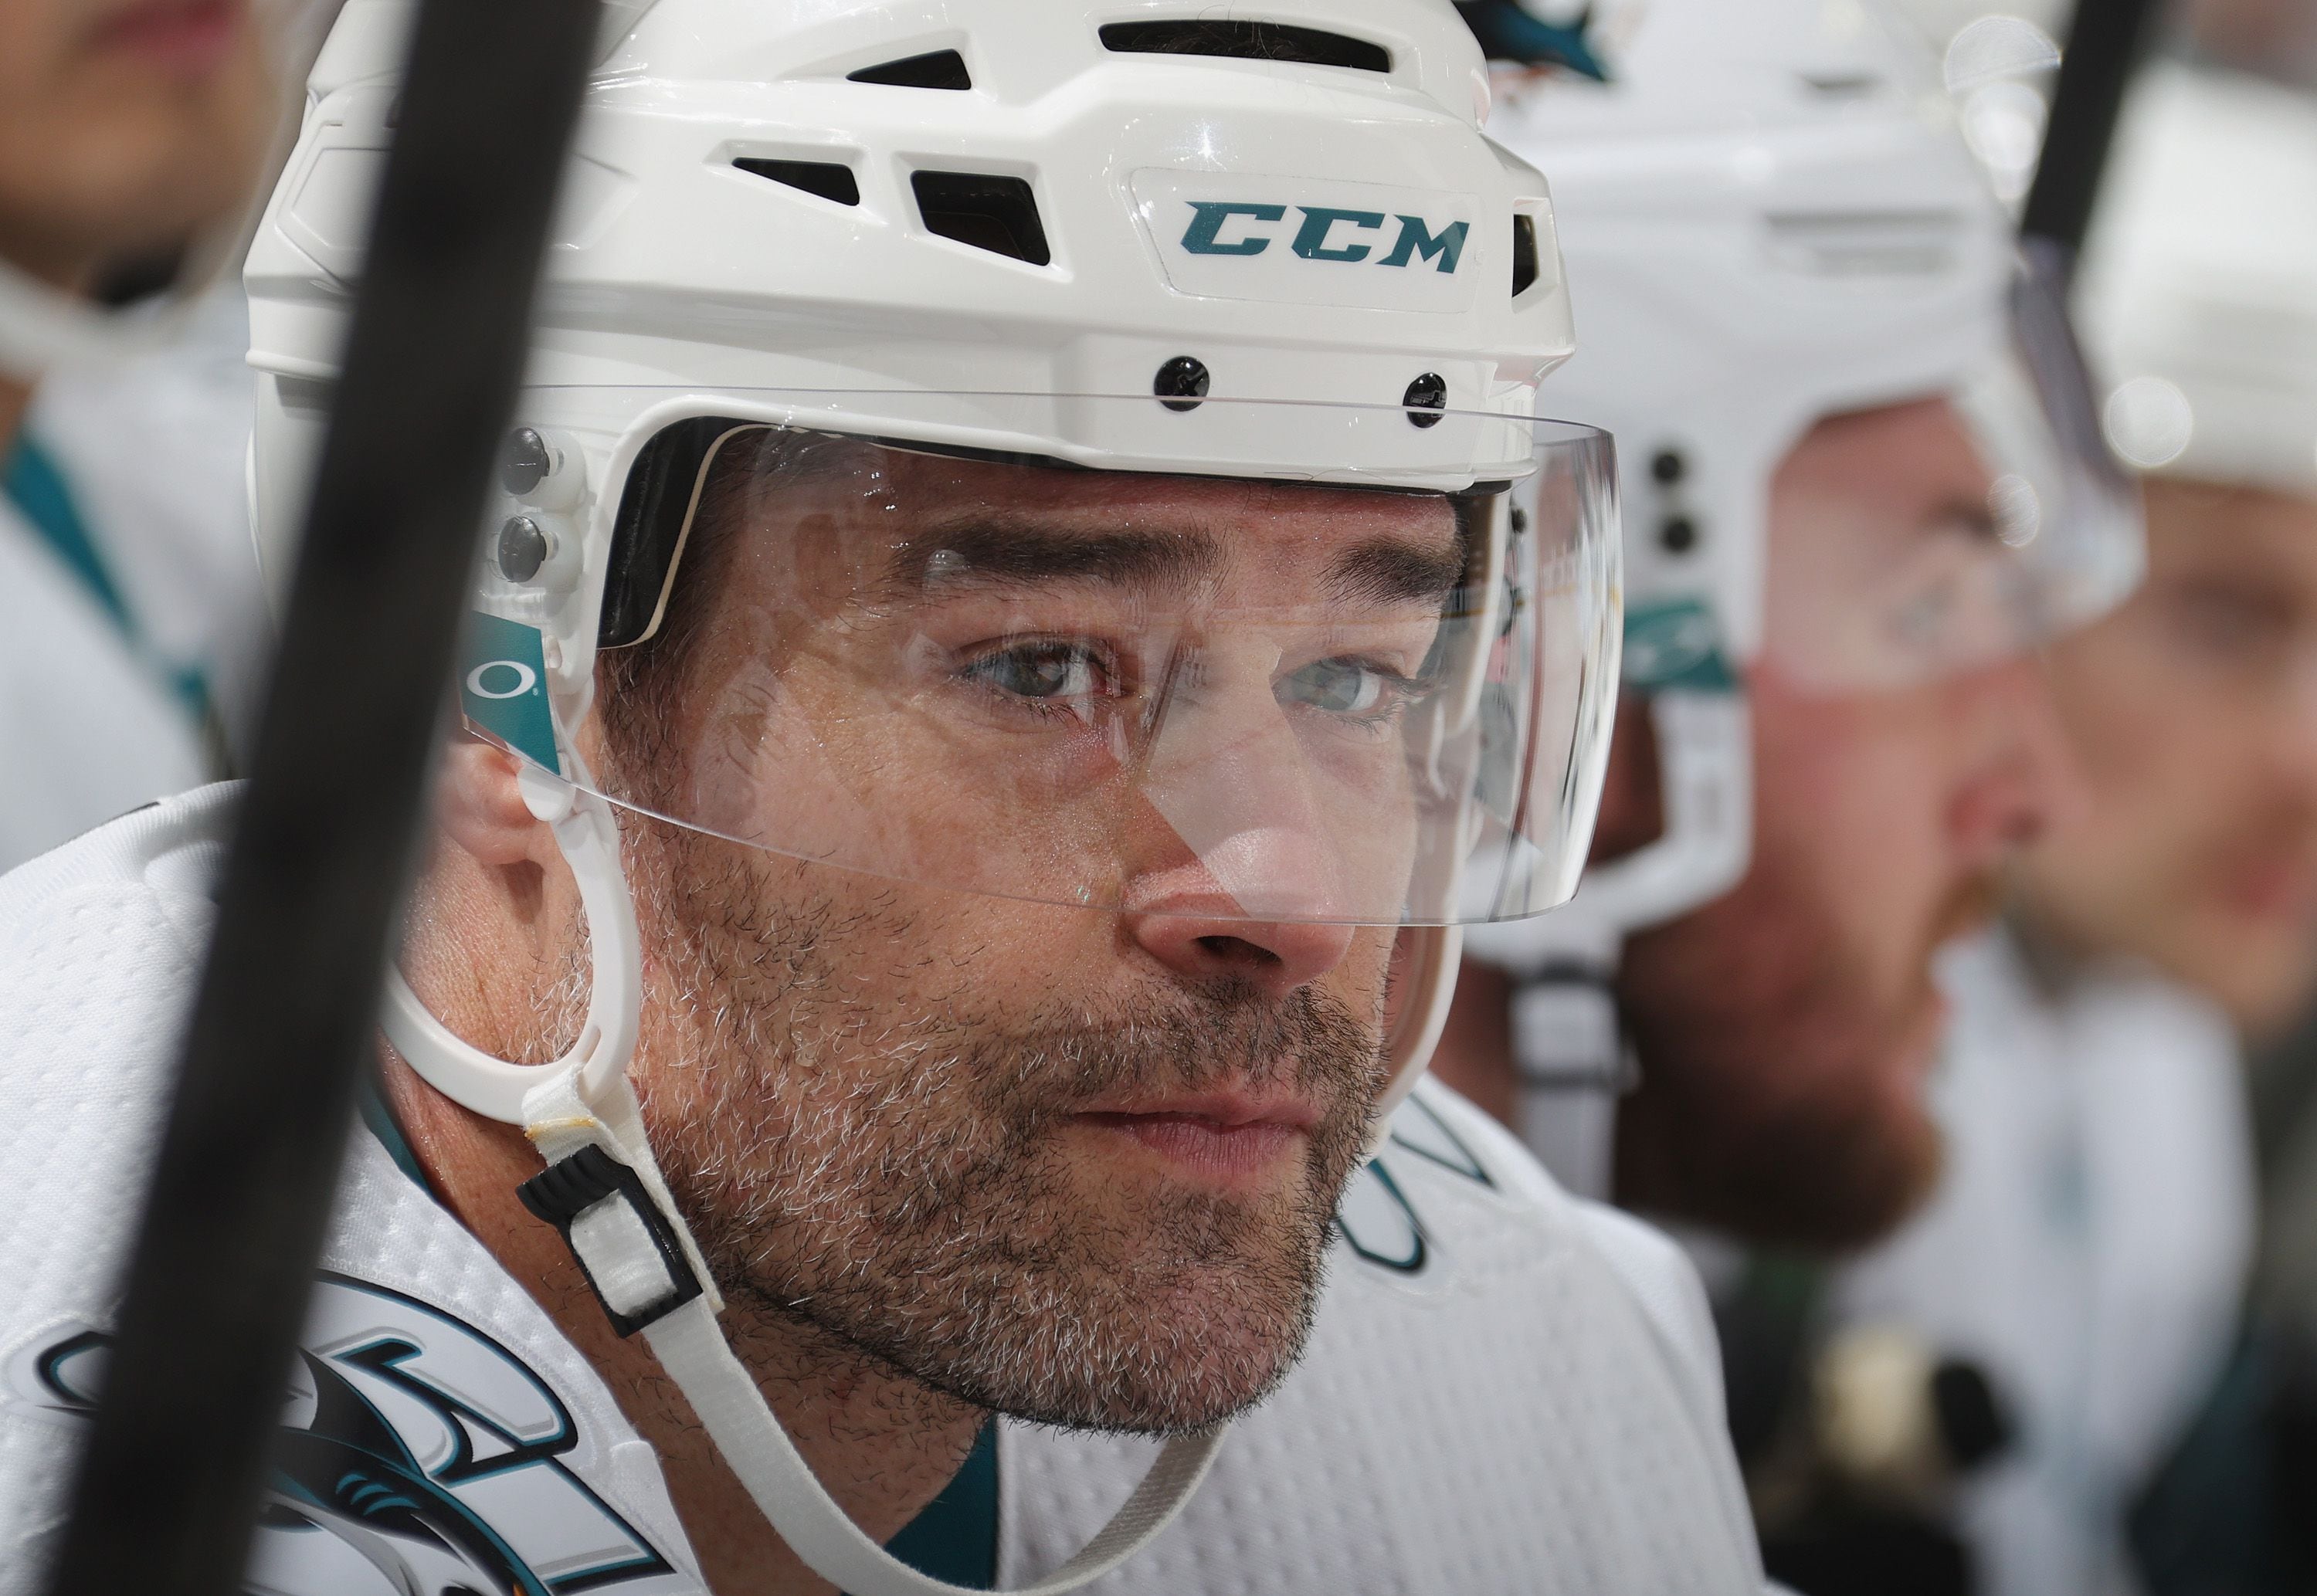 Patrick Marleau returns to Sharks on one-year deal